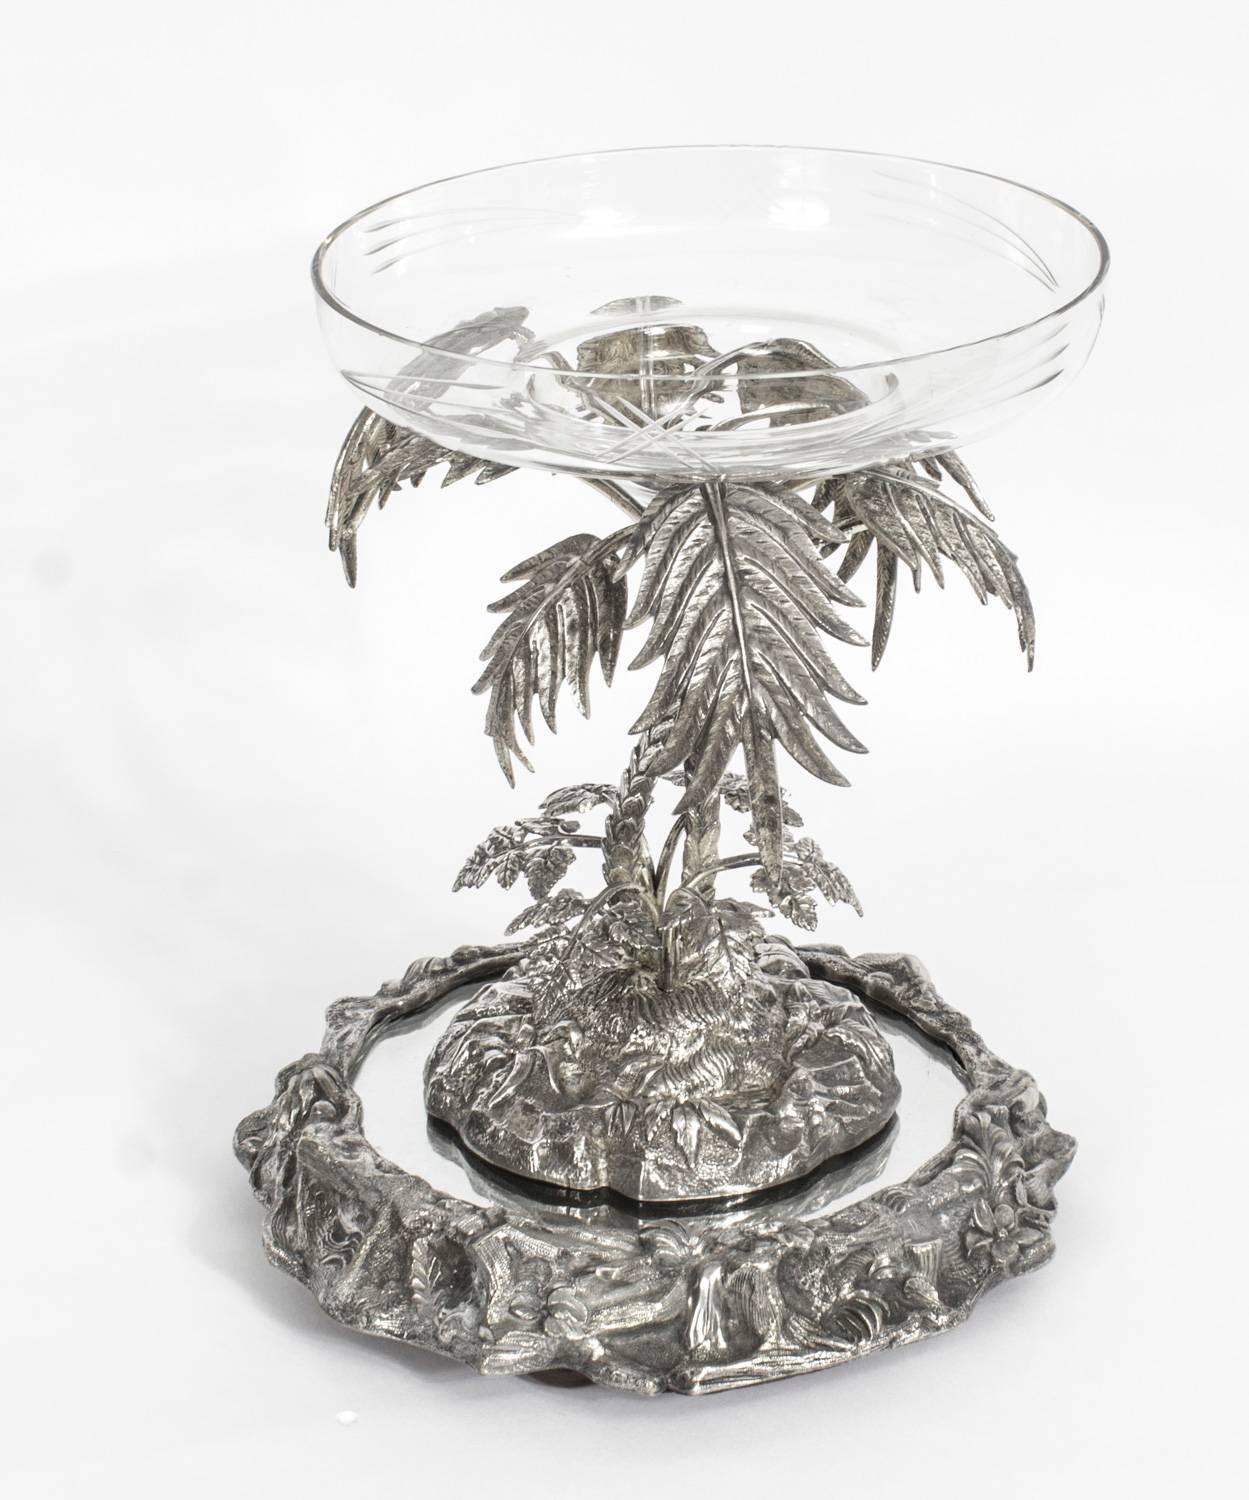 This is an exquisite antique Victorian silver plated Palm Tree centrepiece, circa 1860 in date.

There is no mistaking the unique quality and design of this gorgeous centrepiece which features a silver plated palm tree with the branches reaching